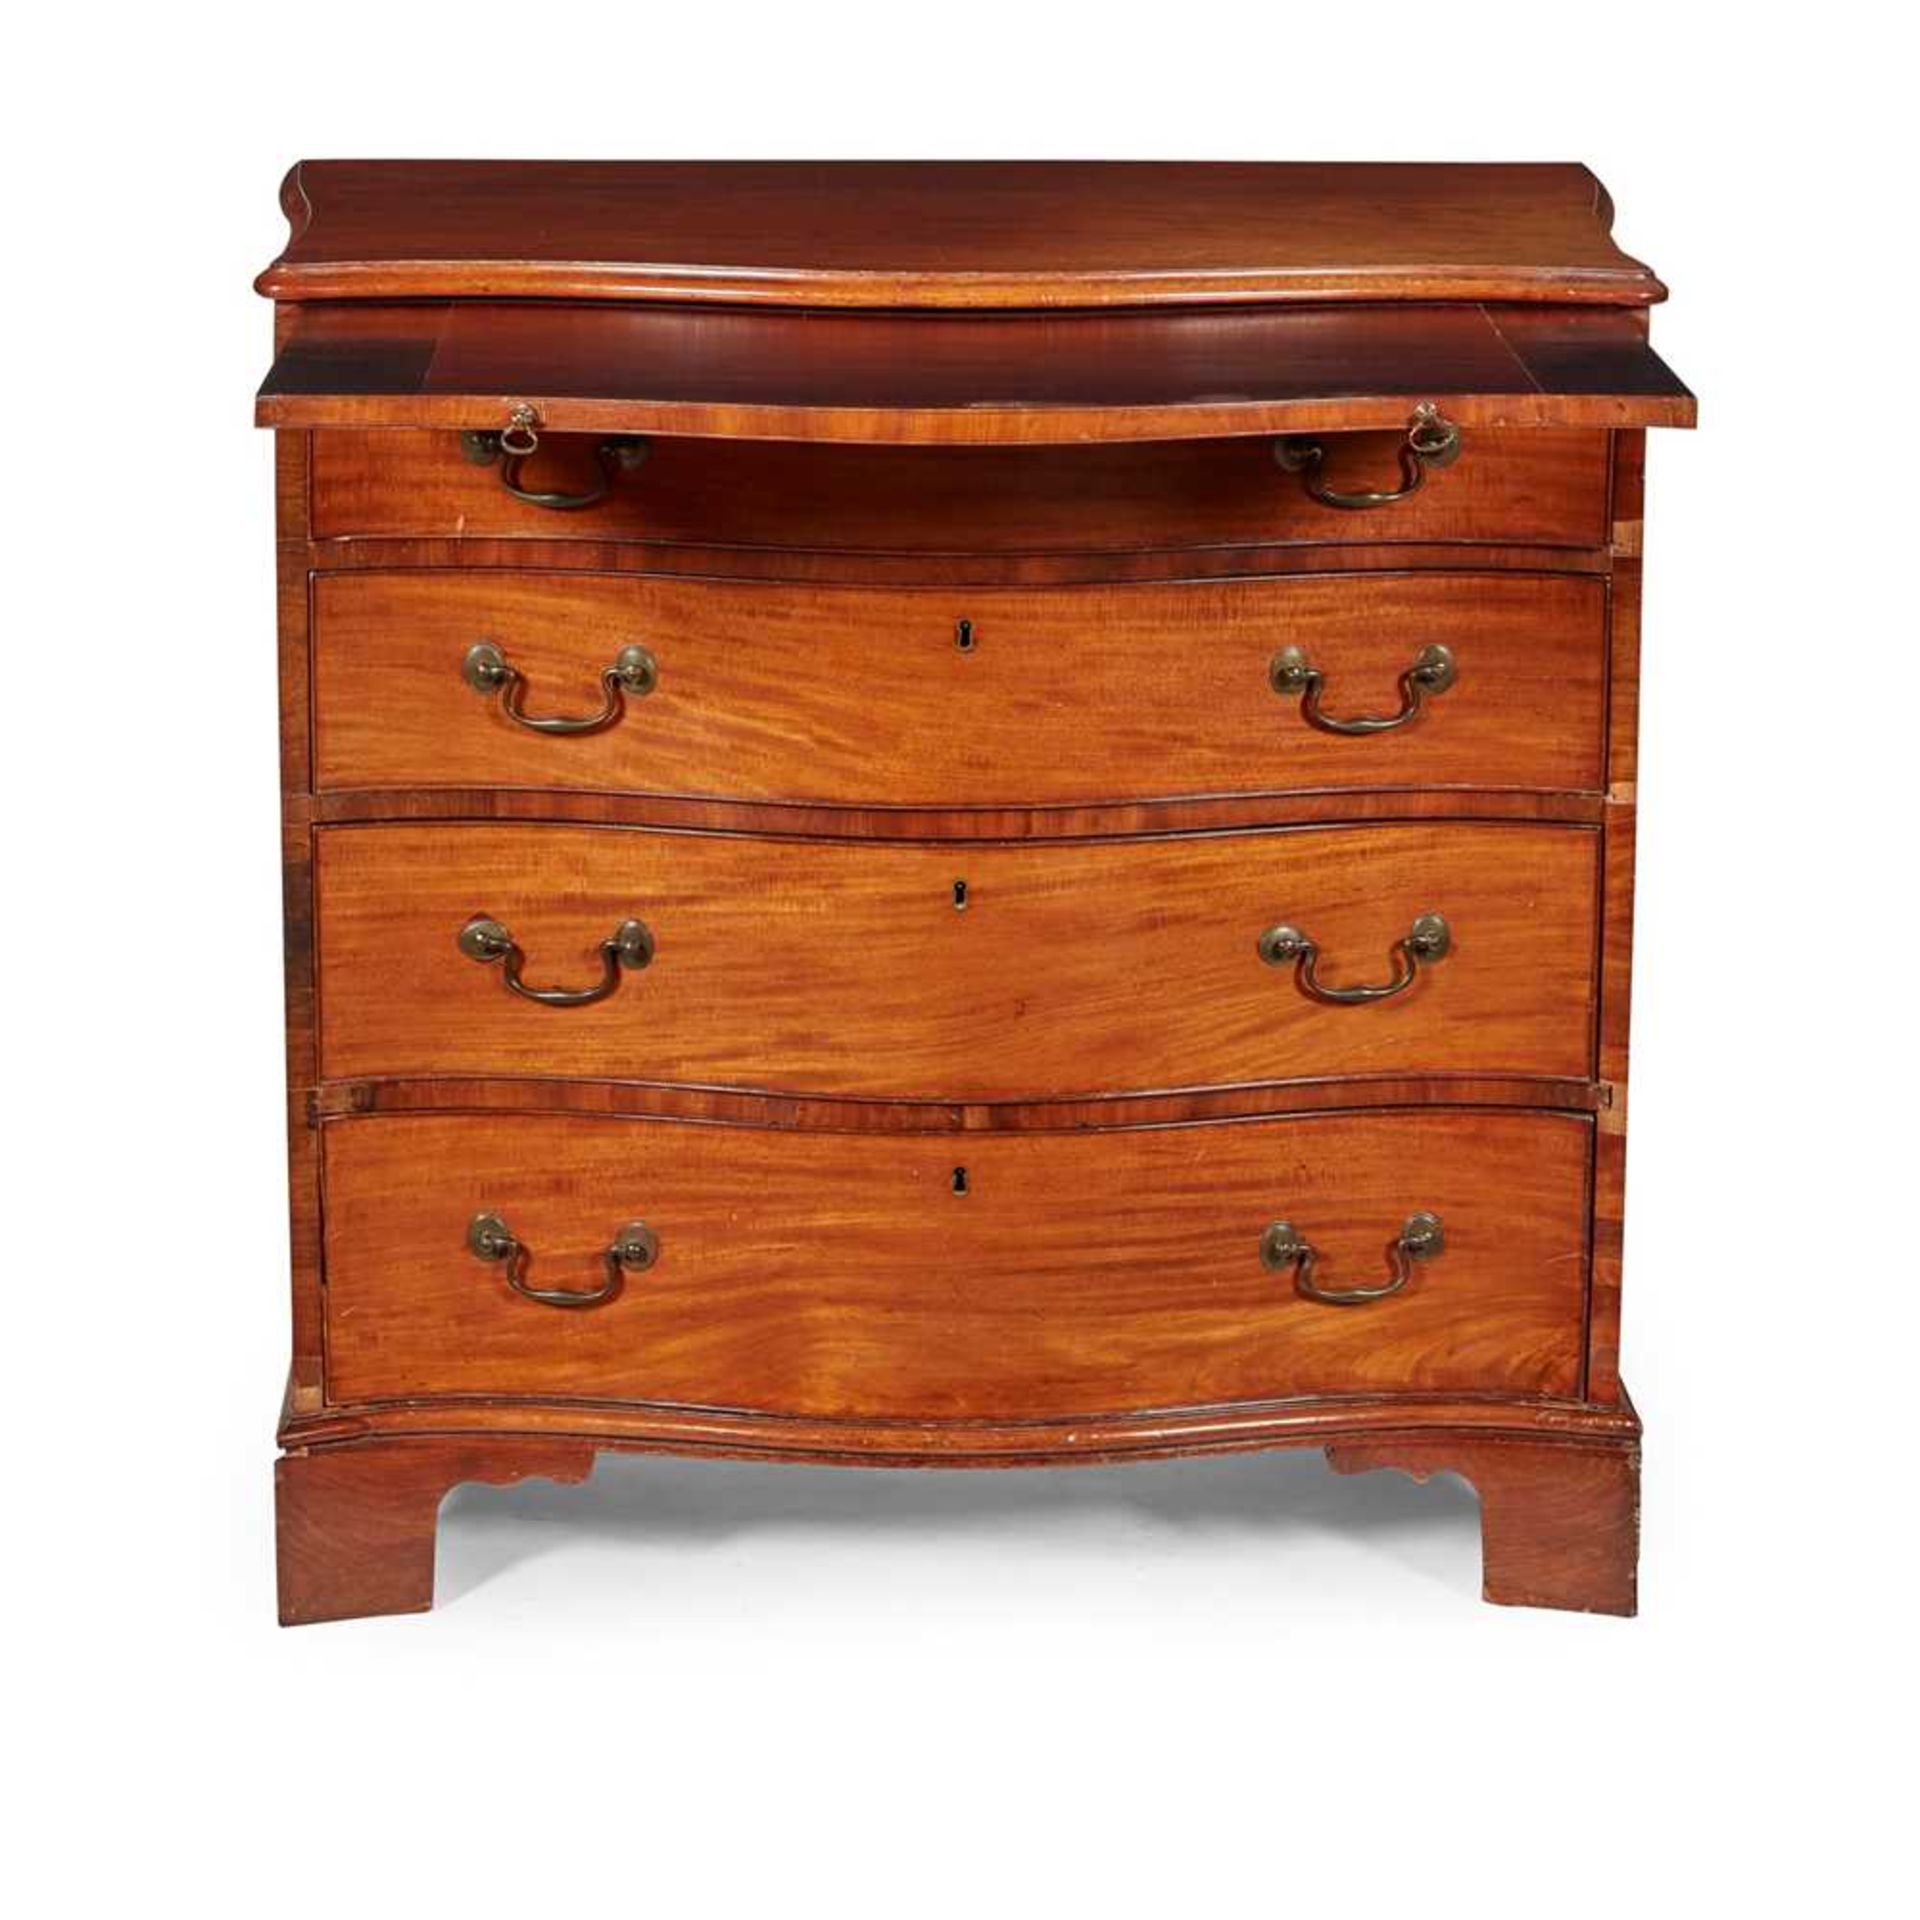 GEORGE III MAHOGANY SERPENTINE CHEST OF DRAWERS 18TH CENTURY - Image 2 of 3